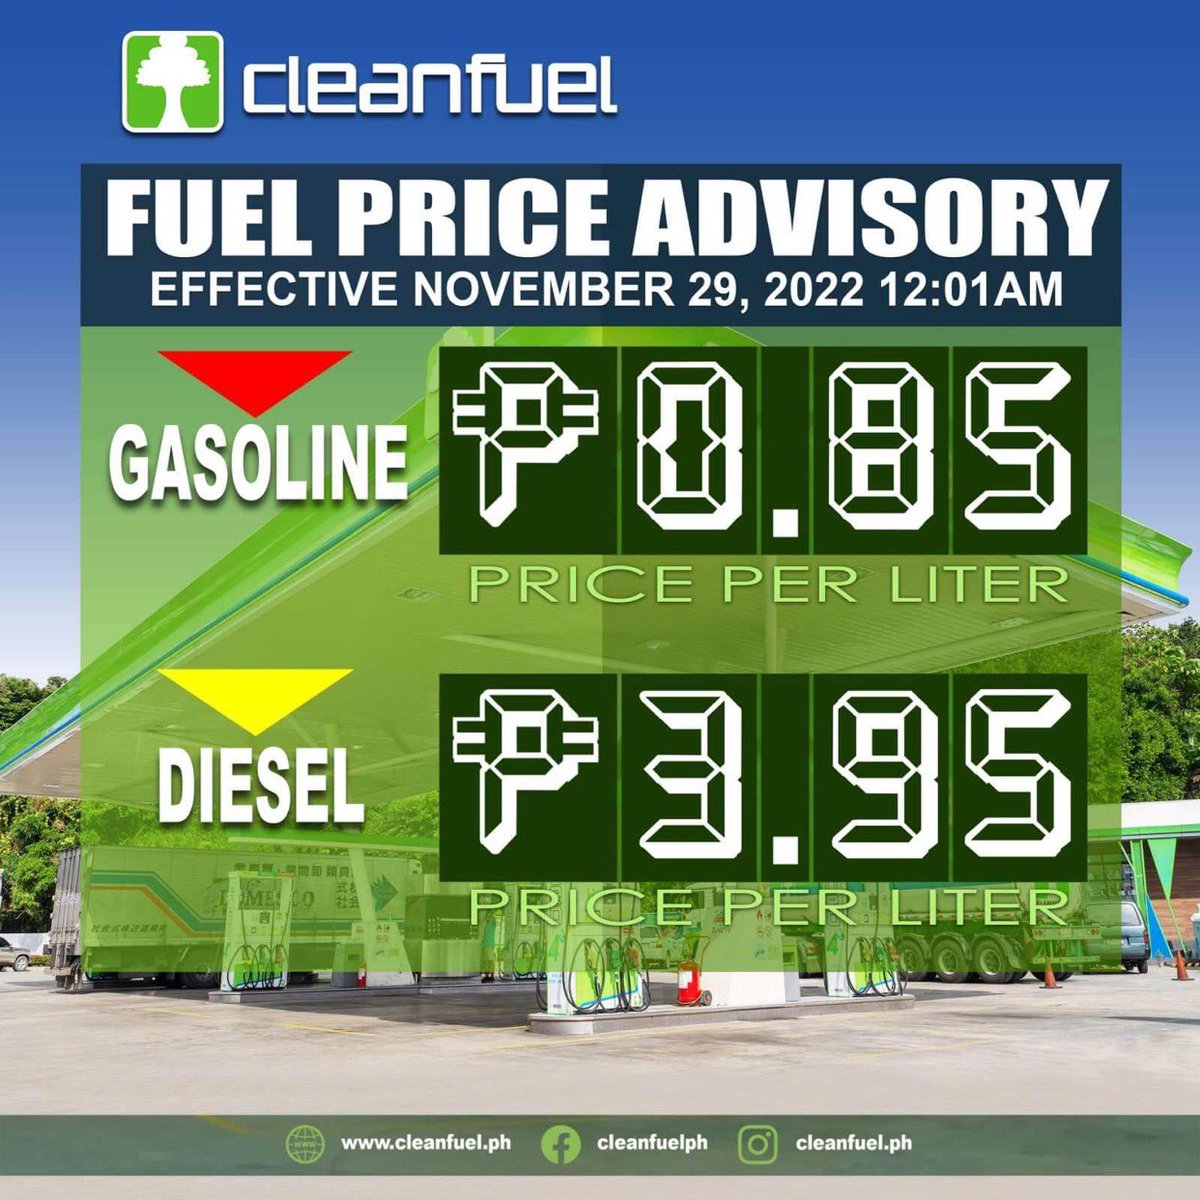 #CleanfuelPH will implement price adjustment, effective Tuesday, November 29, 2022 at 12:01AM. 

⬇️ Gasoline - 0.85/L (Rollback) 
⬇️ Diesel - 3.95/L (Rollback) 

Stay safe and healthy!